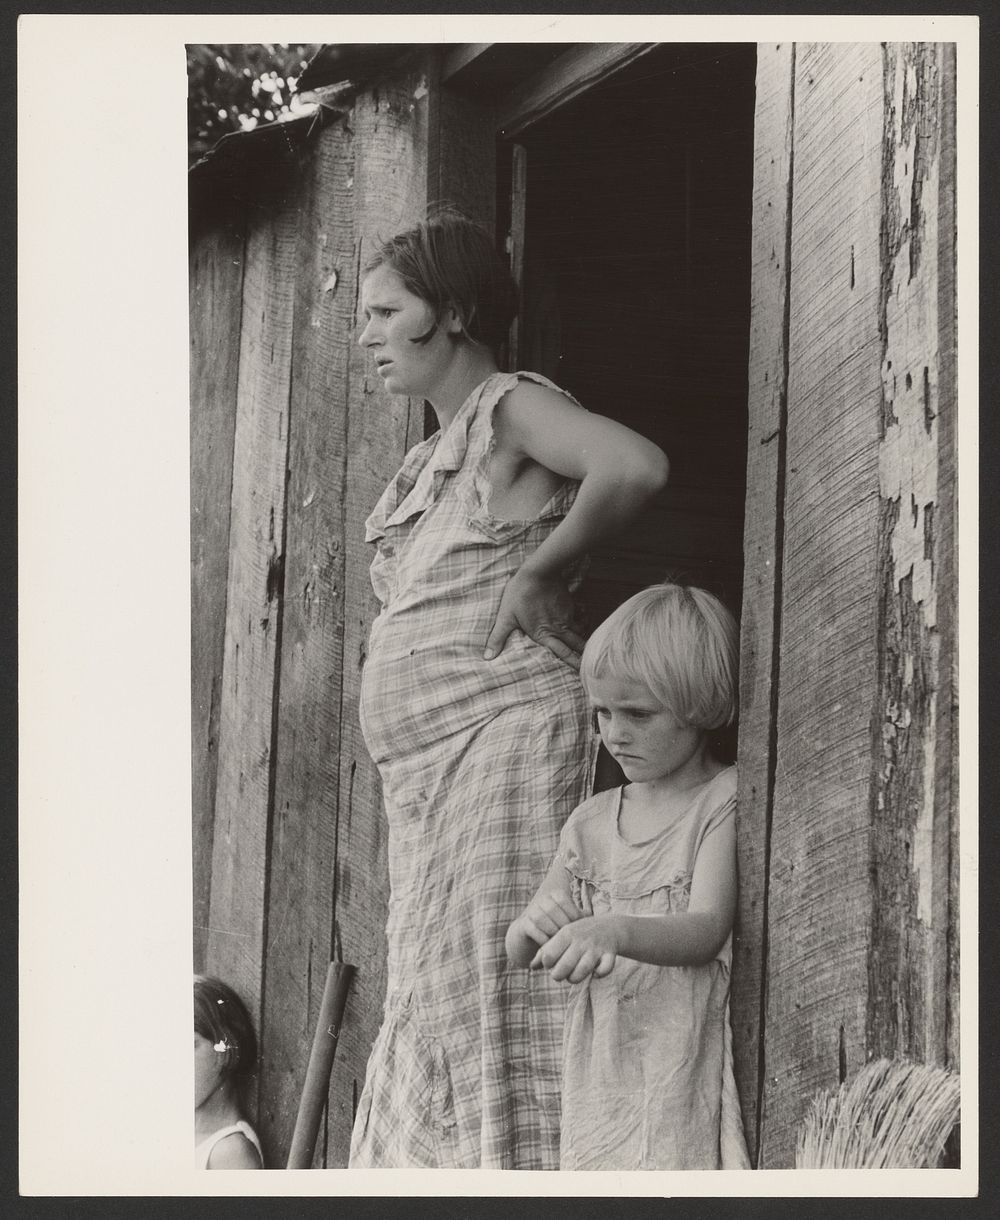 Wife and child of sharecropper, Washington County, Arkansas by Arthur Rothstein